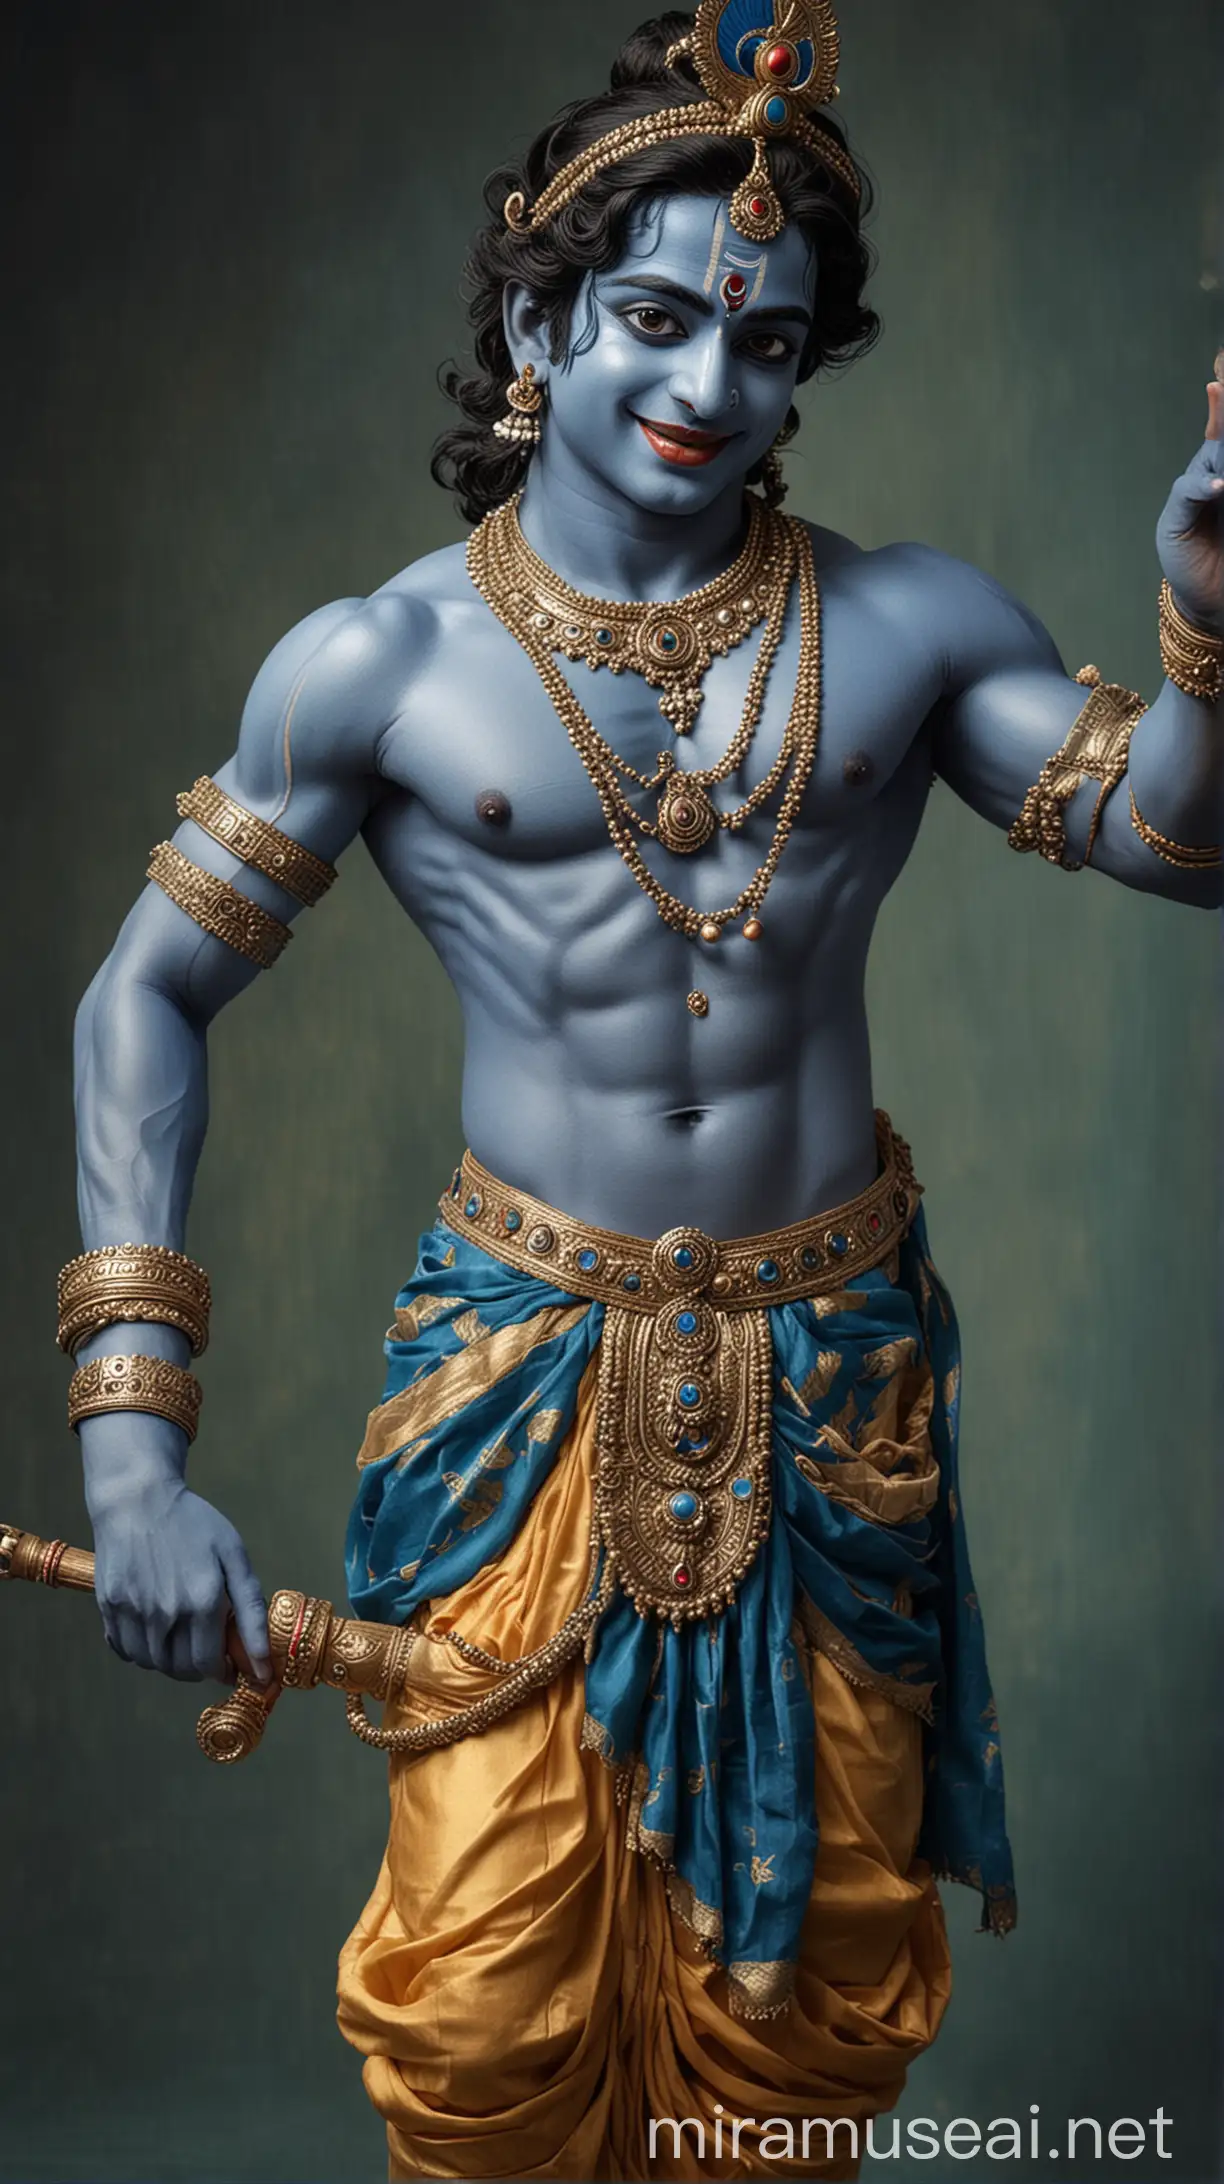 Lord Krishna,perfect body,,abs ,,blue colour skin,,Lord Krishna makeup,,Lord Krishna outfit,,standing posed photo,,body in center of the photo,,smile on  face,,